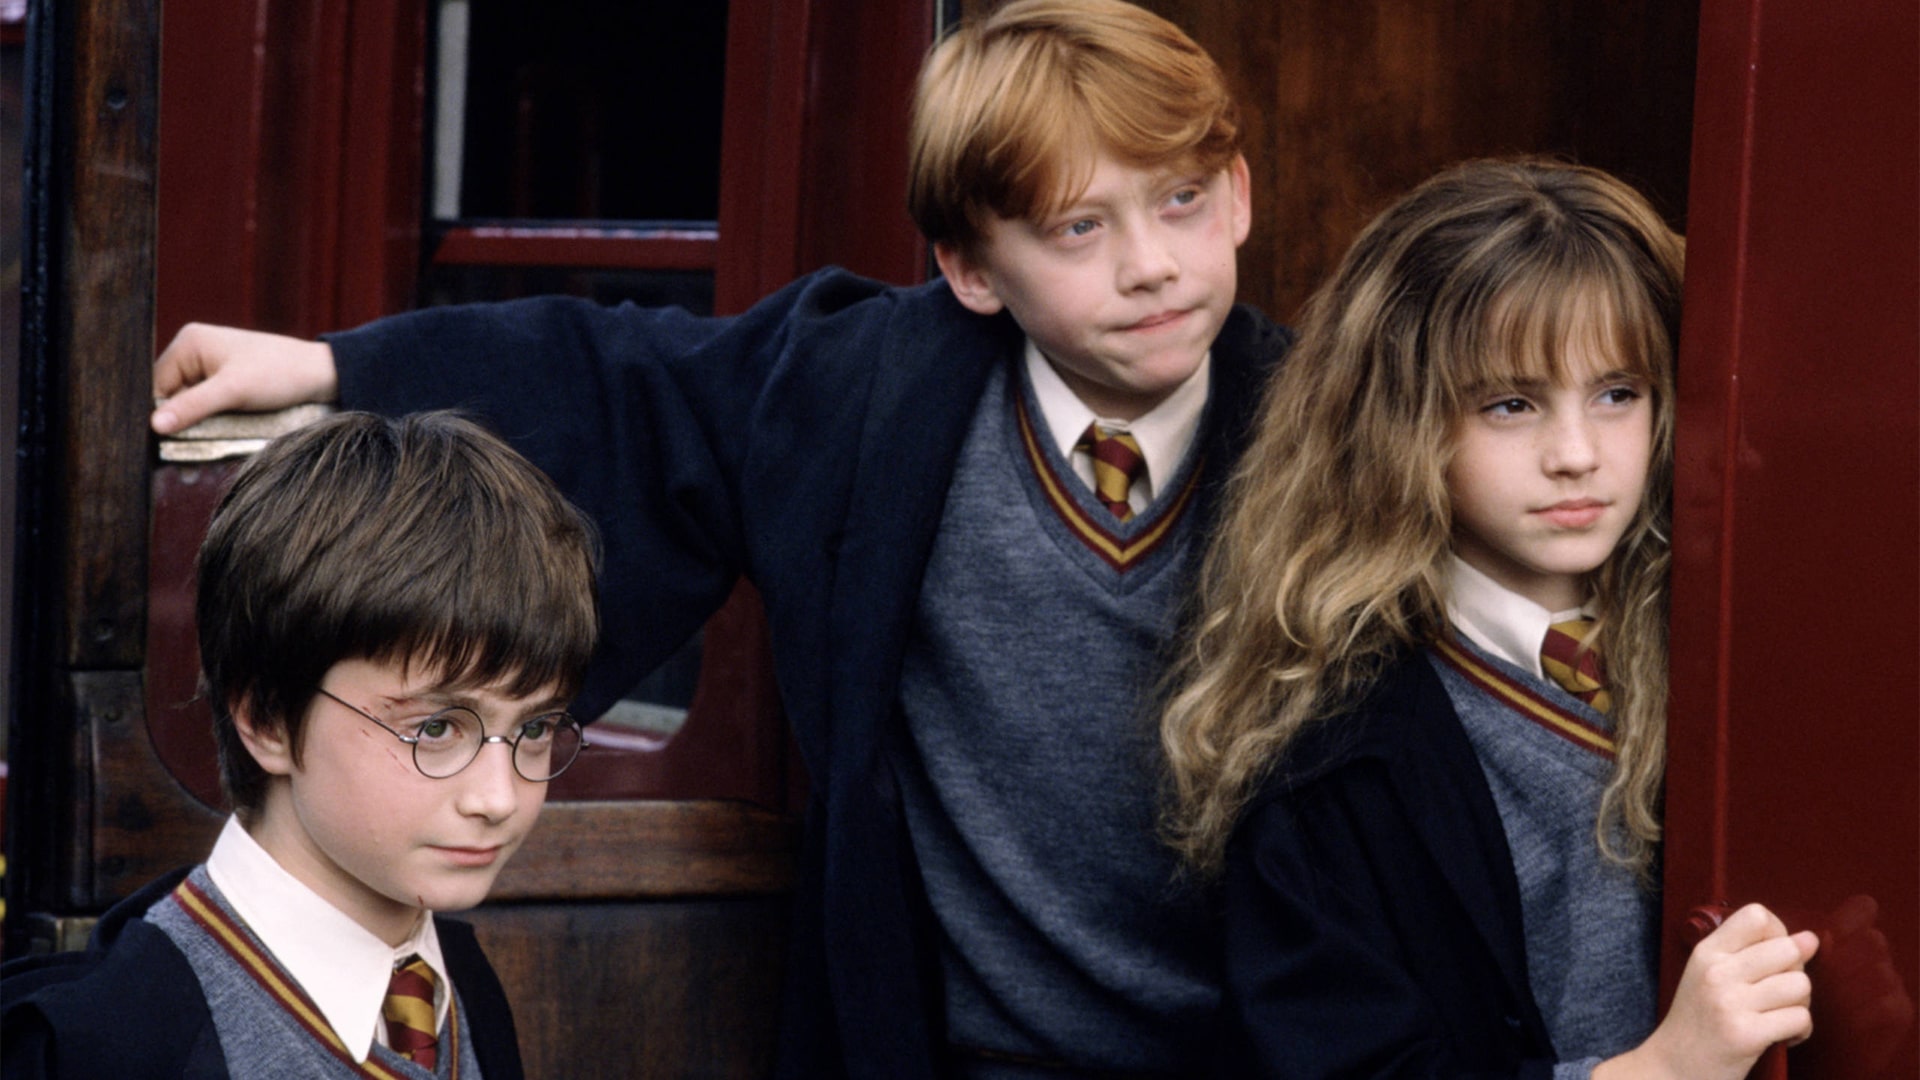 Harry Potter and the Philosopher’s Stone Movie - 64 Harry Potter and the Philosopher’s Stone (2001) Movie Facts You Haven’t Heard Before 